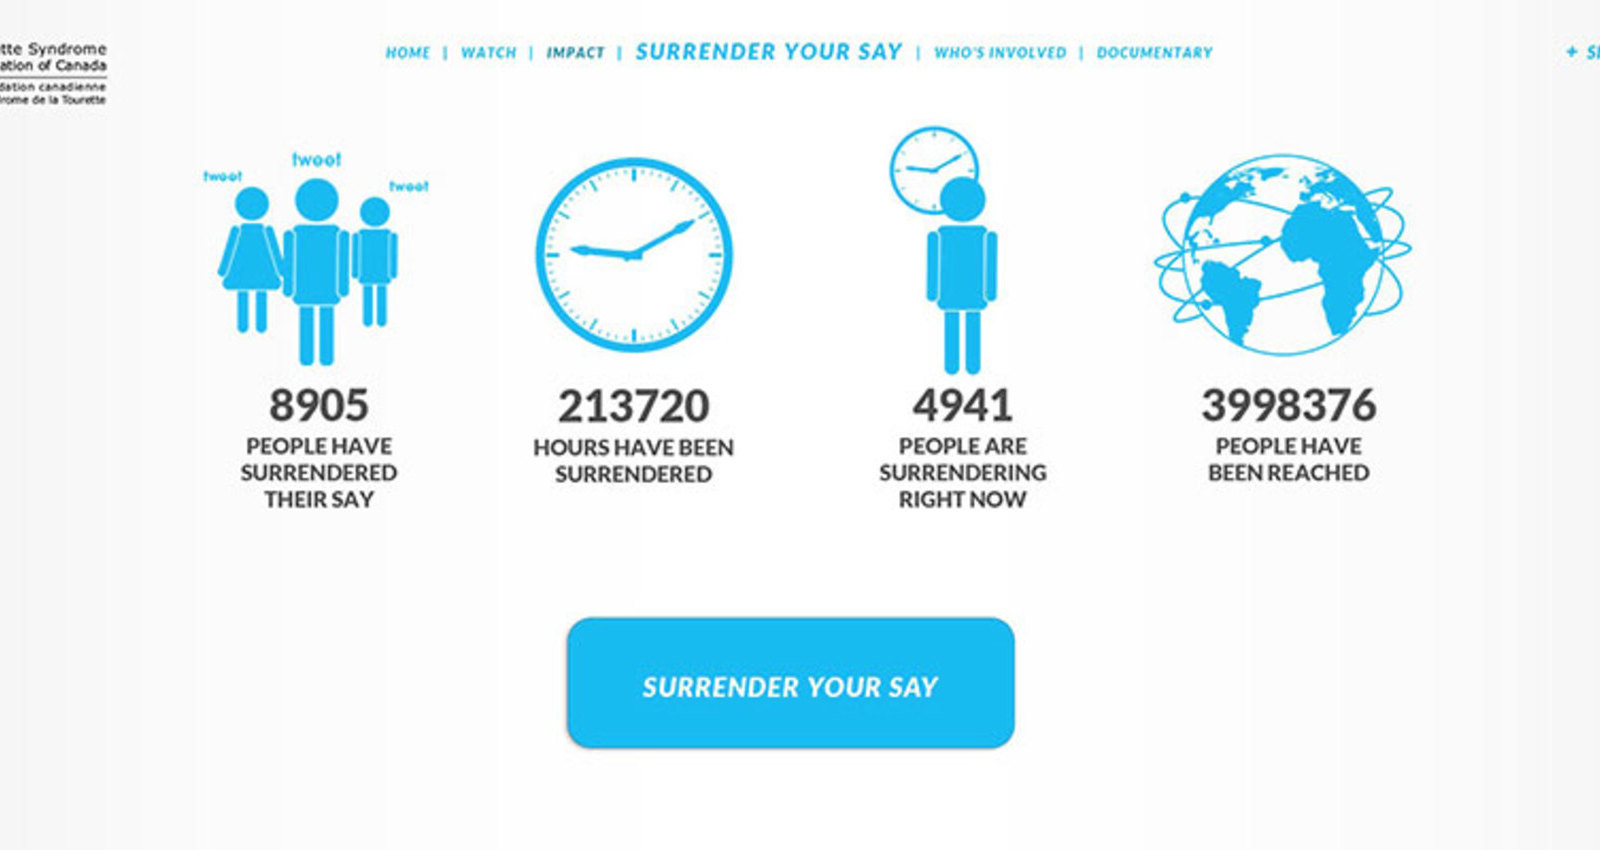 Surrender Your Say - Twitter Campaign for Tourette Syndrome